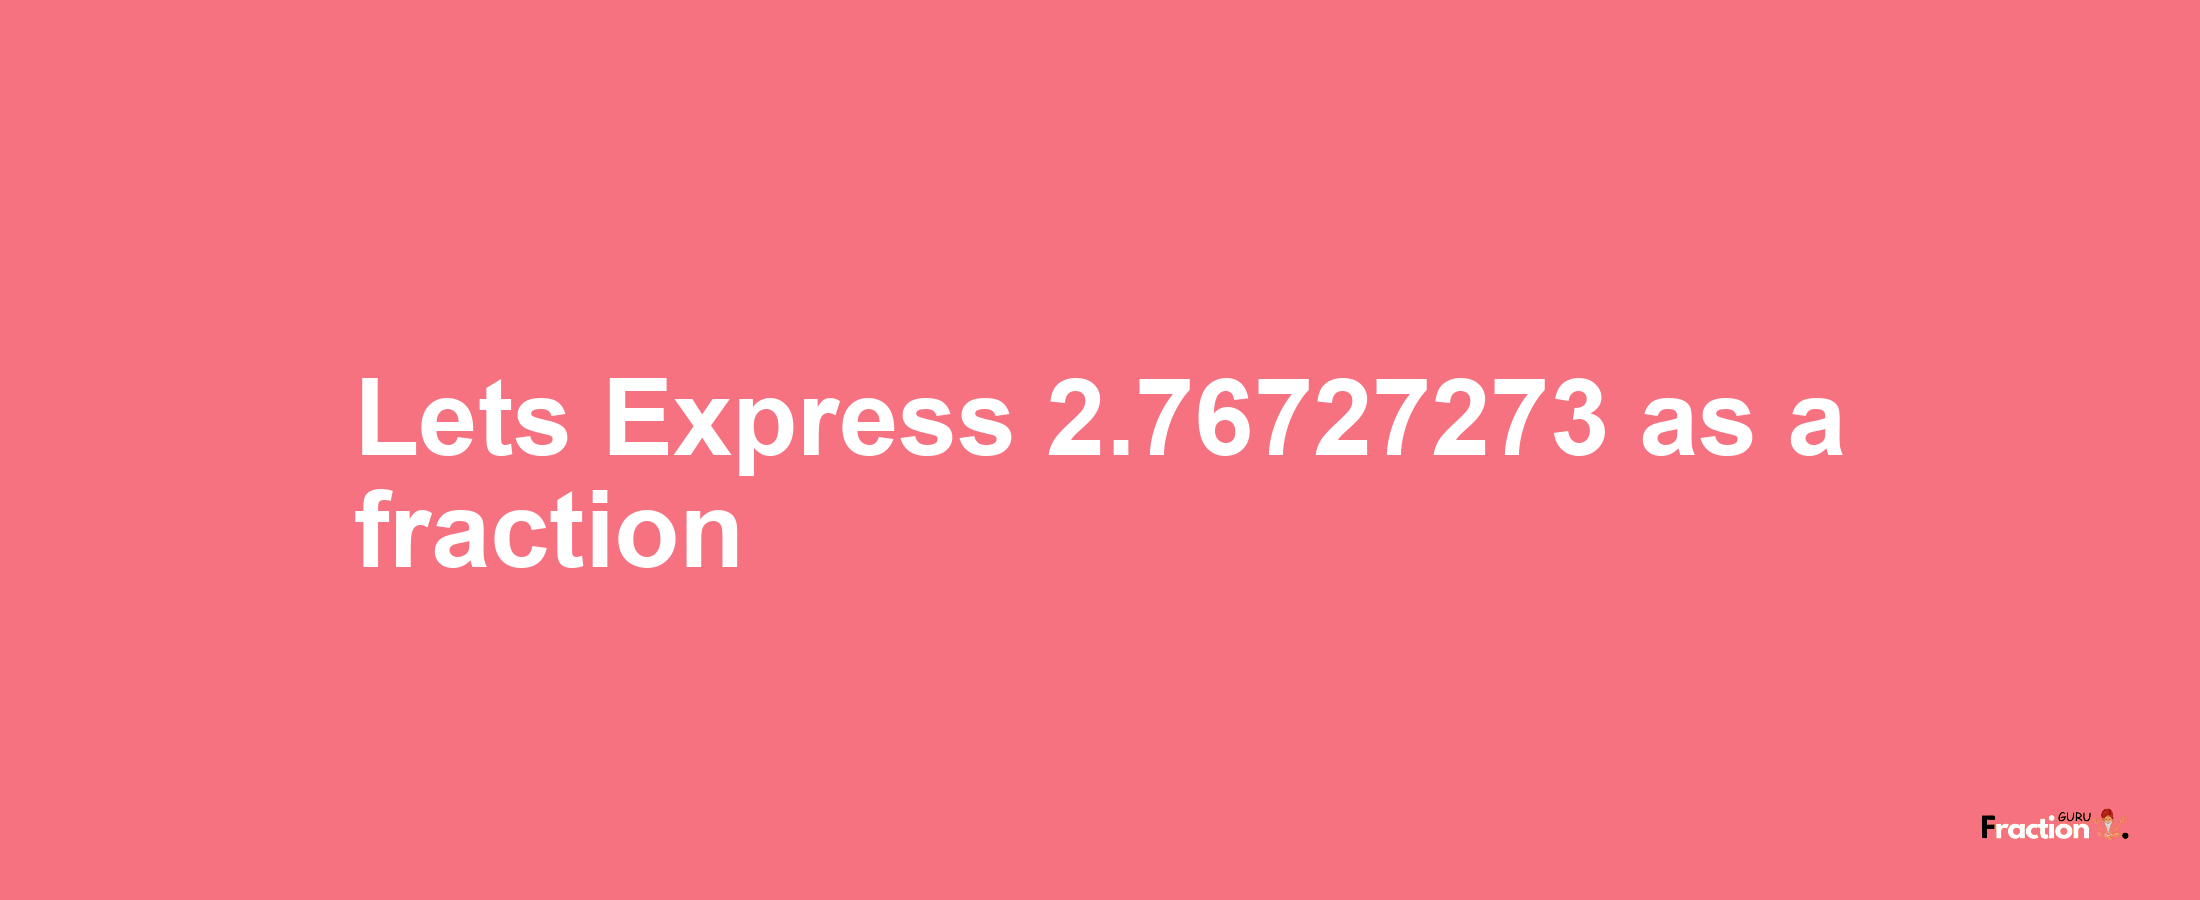 Lets Express 2.76727273 as afraction